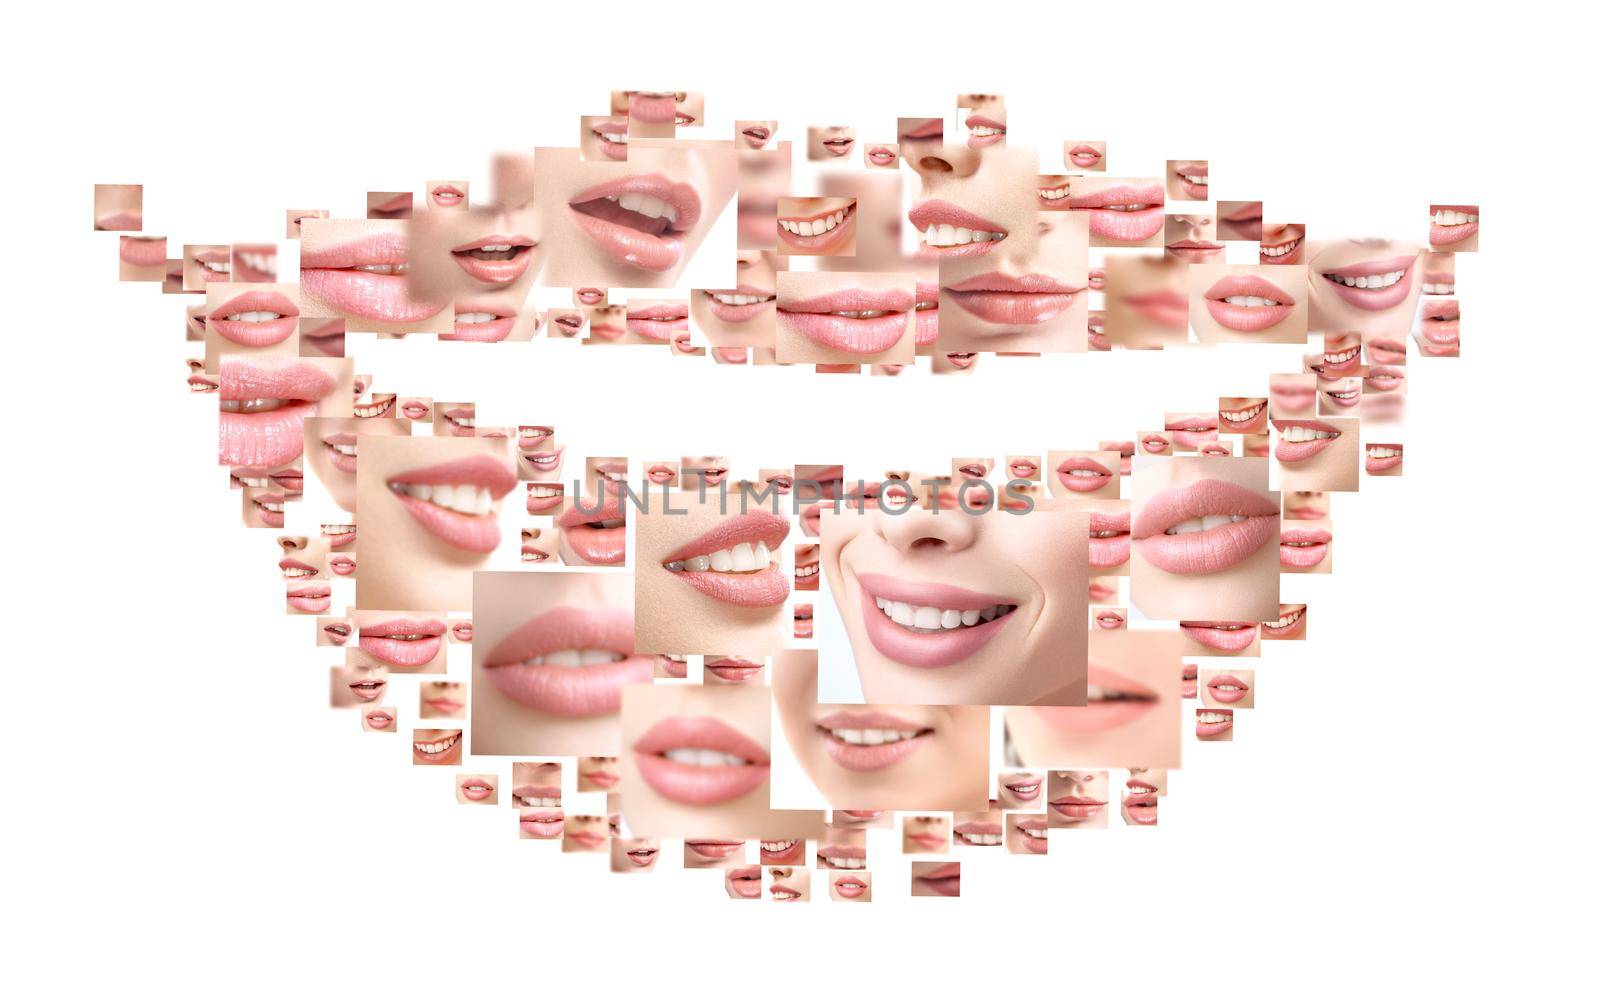 Collage of beautiful women smiling close up shots by SerhiiBobyk